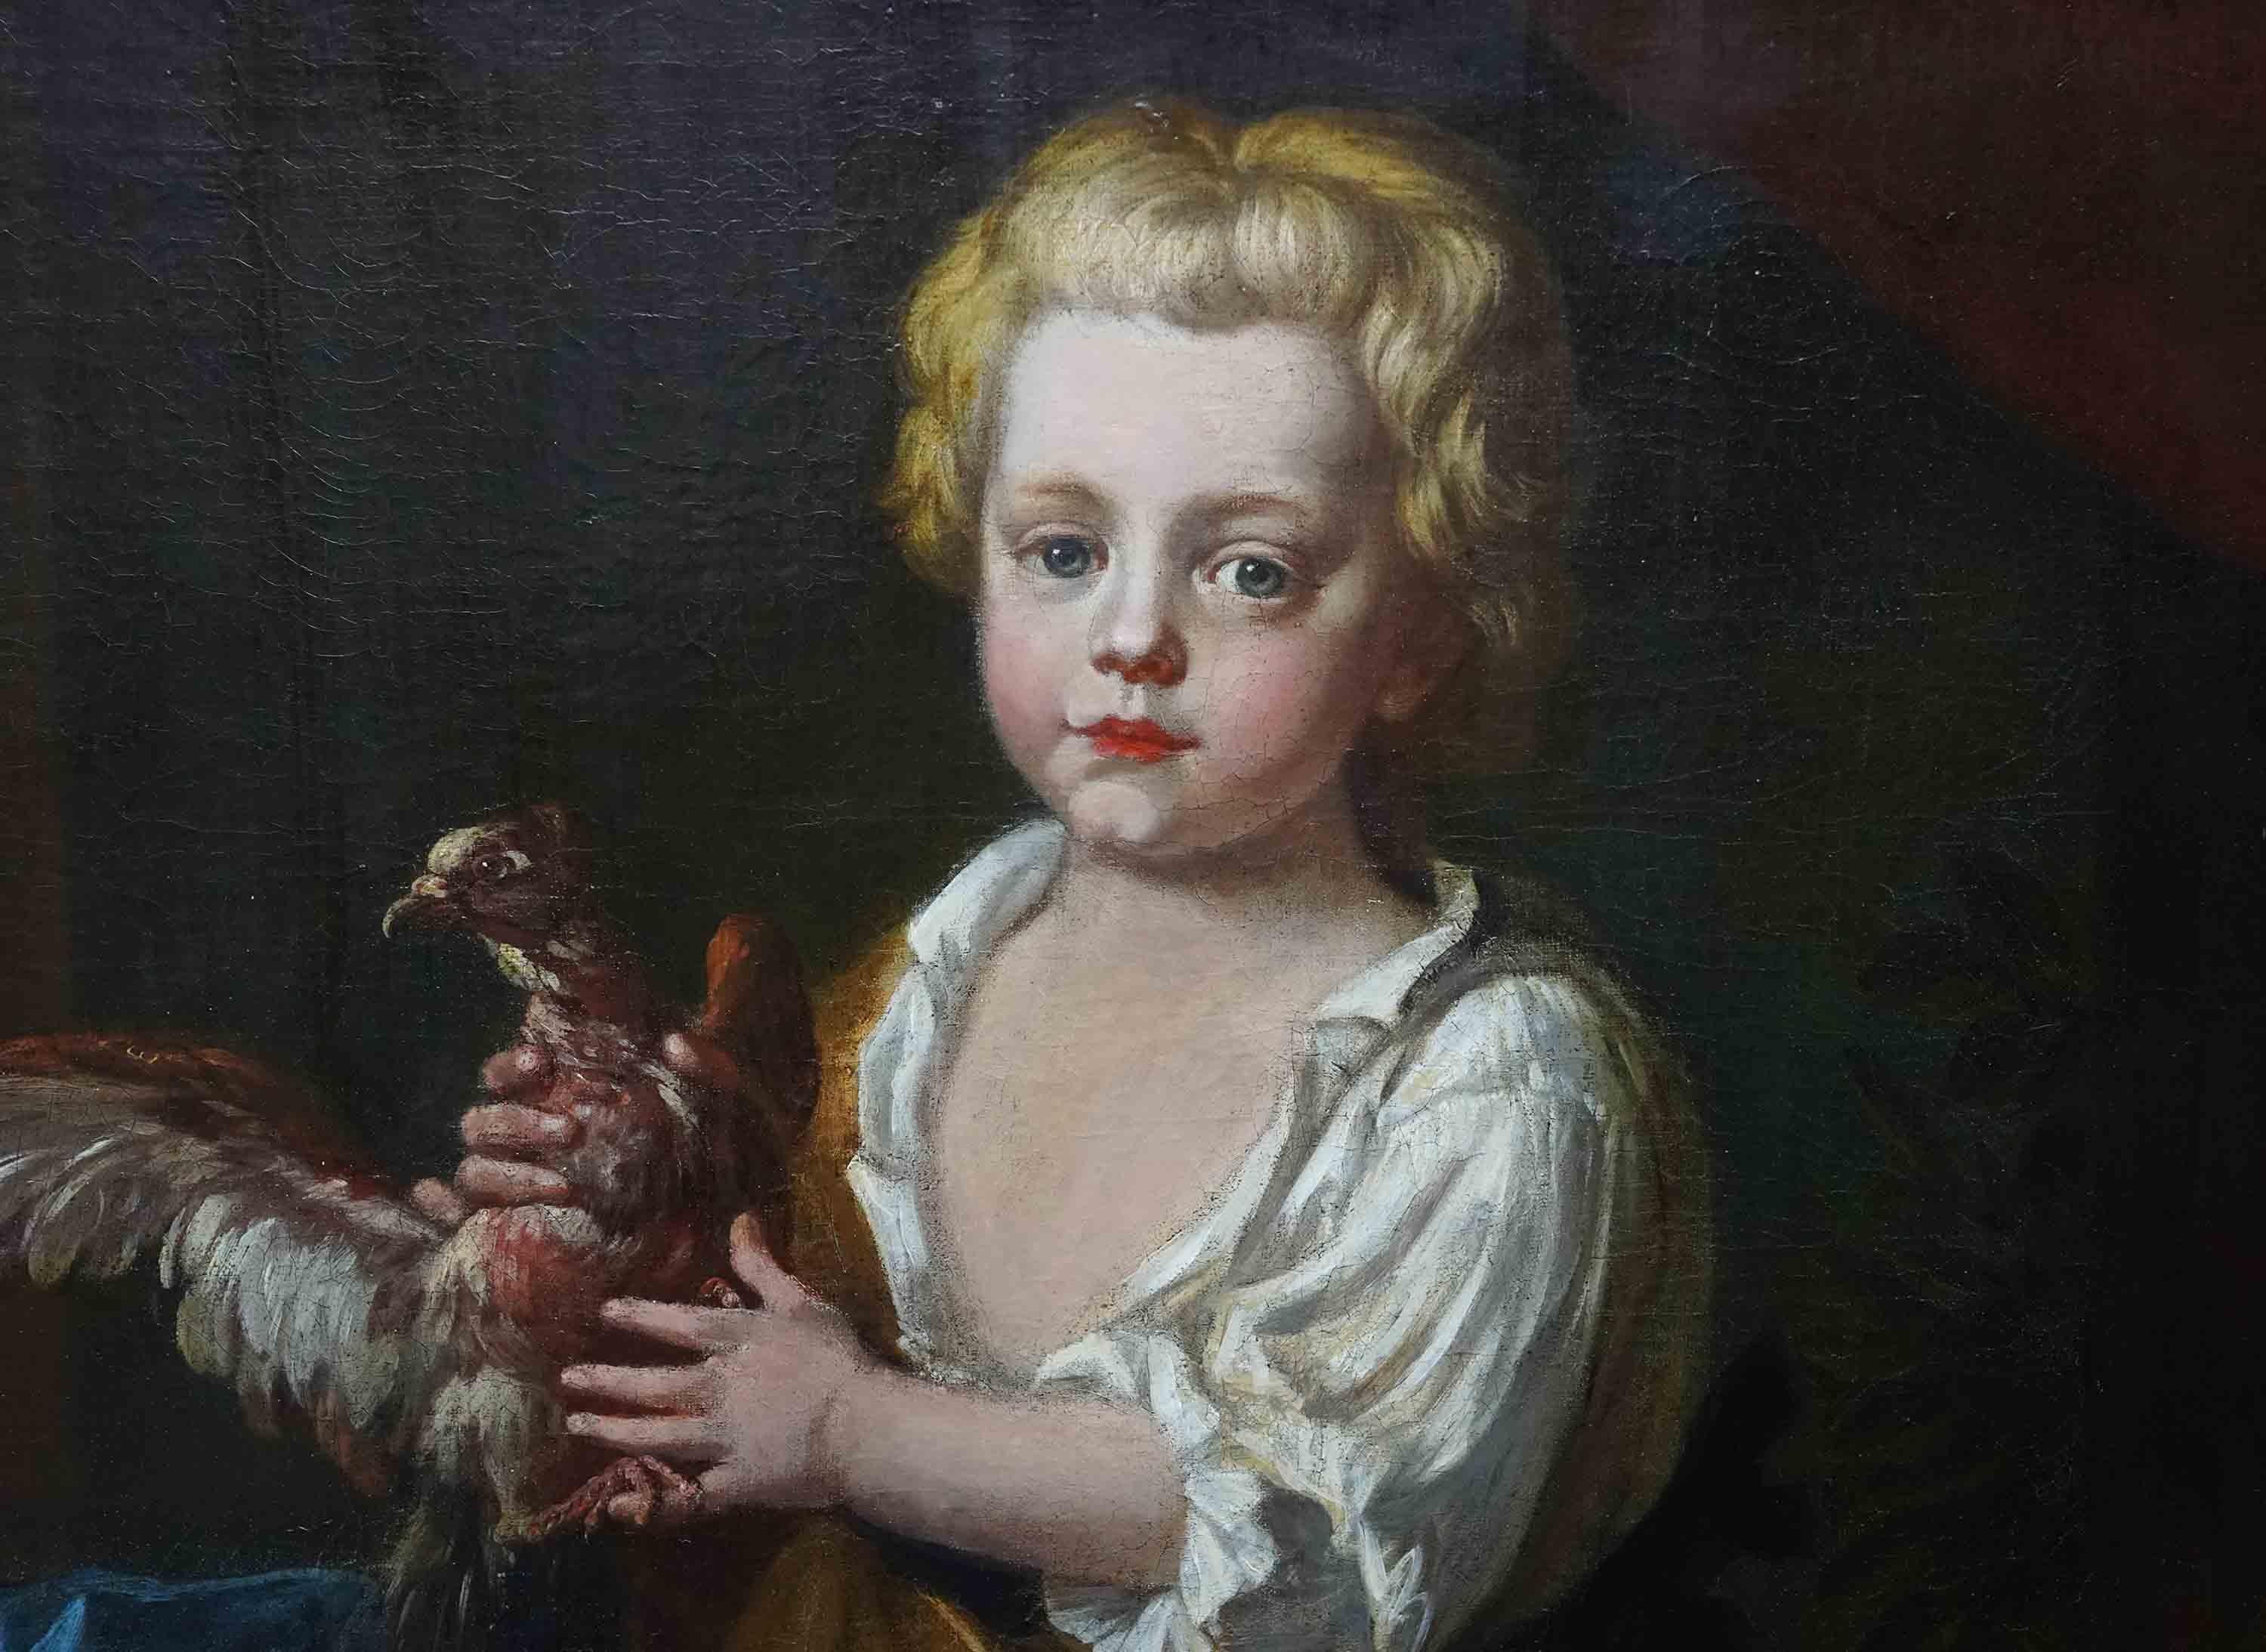 This stunning 17th century Old Master portrait oil painting is attributed to Godfrey Kneller. Painted circa 1680 it is a superb full length portrait of a blonde haired boy holding a struggling bird. He is bare foot and dressed in a white shirt with